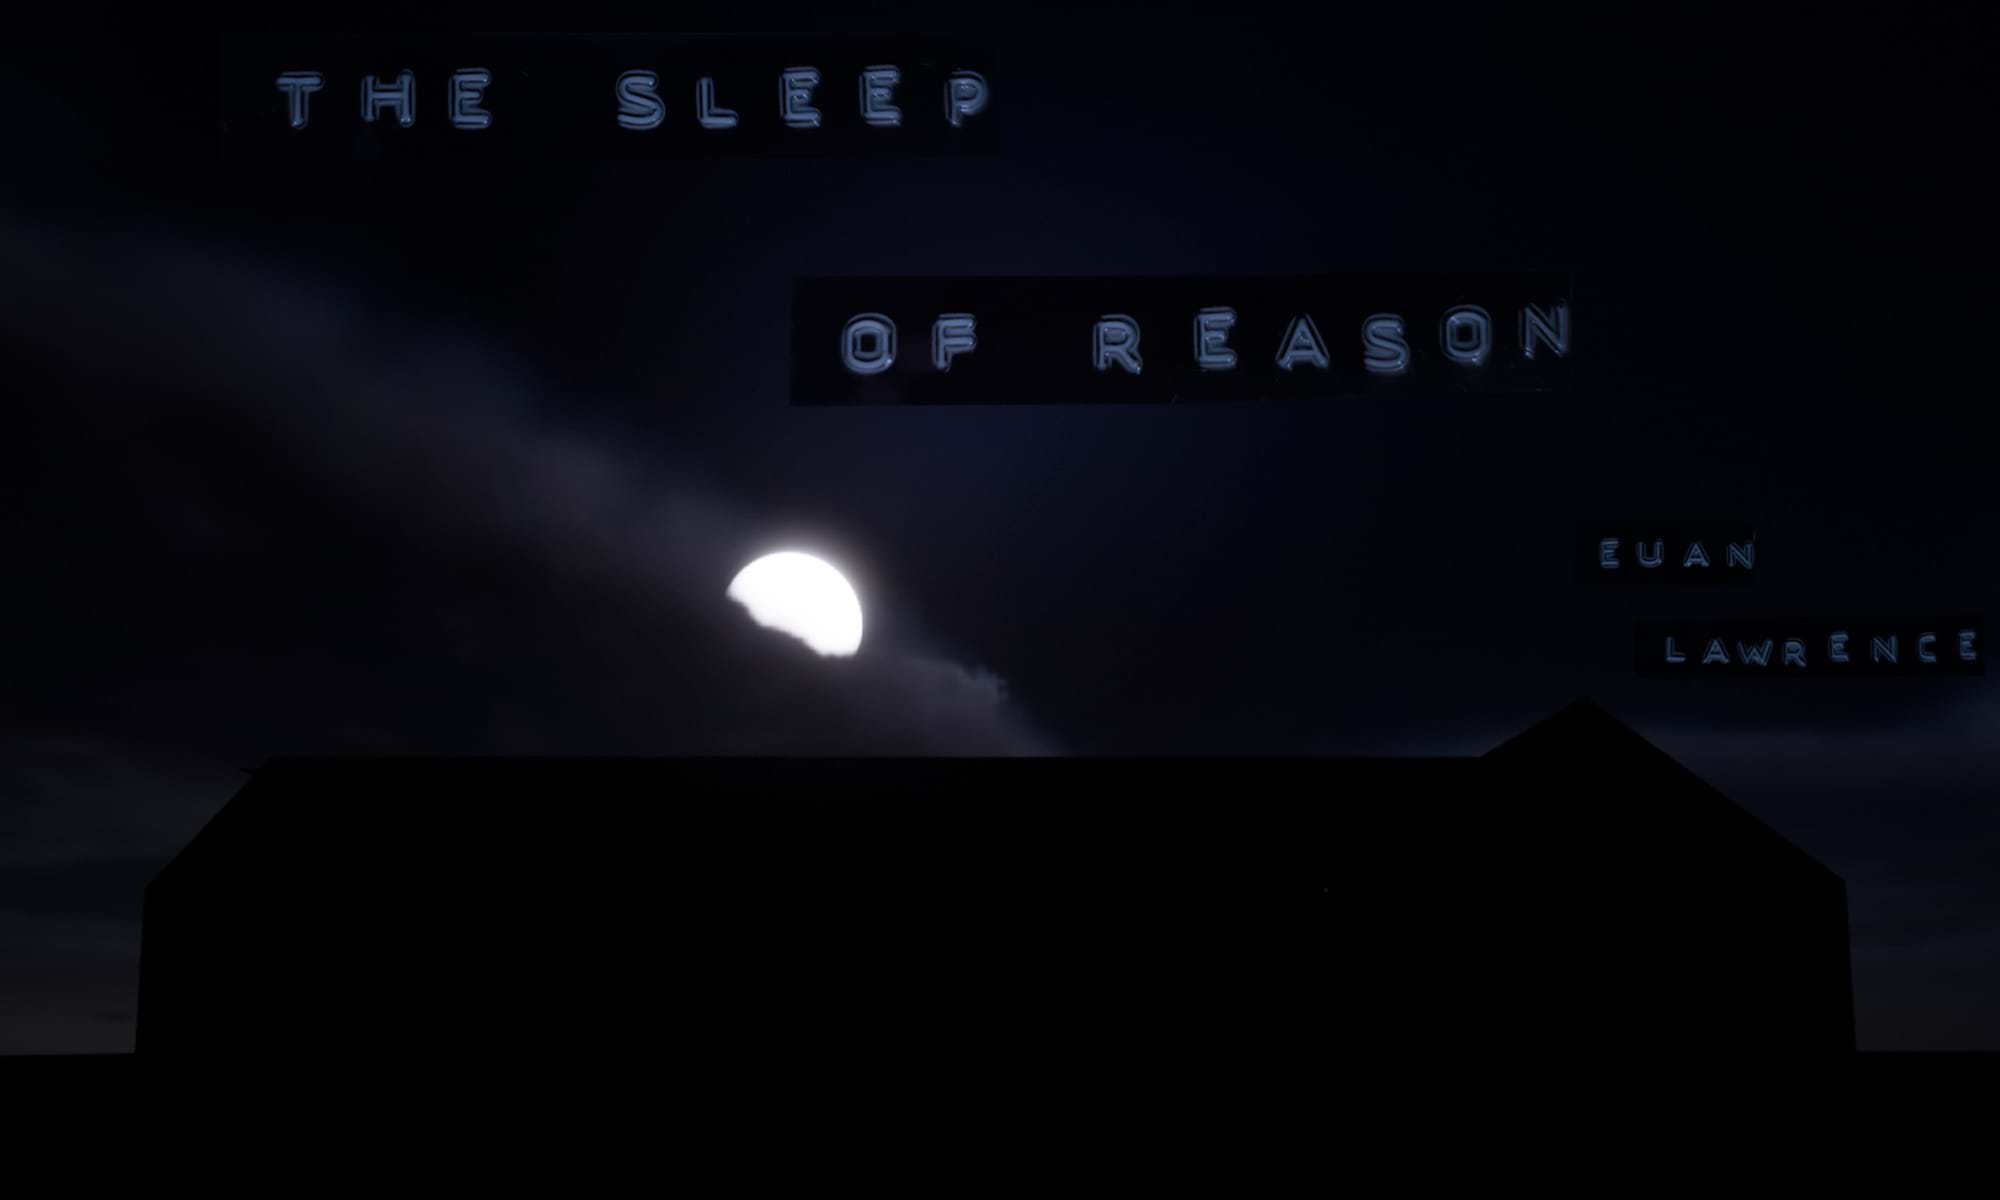 'The Sleep of Reason' is a 2023 Digital Graduate Show project by Euan Lawrence , a Games Design and Production student at Abertay University.